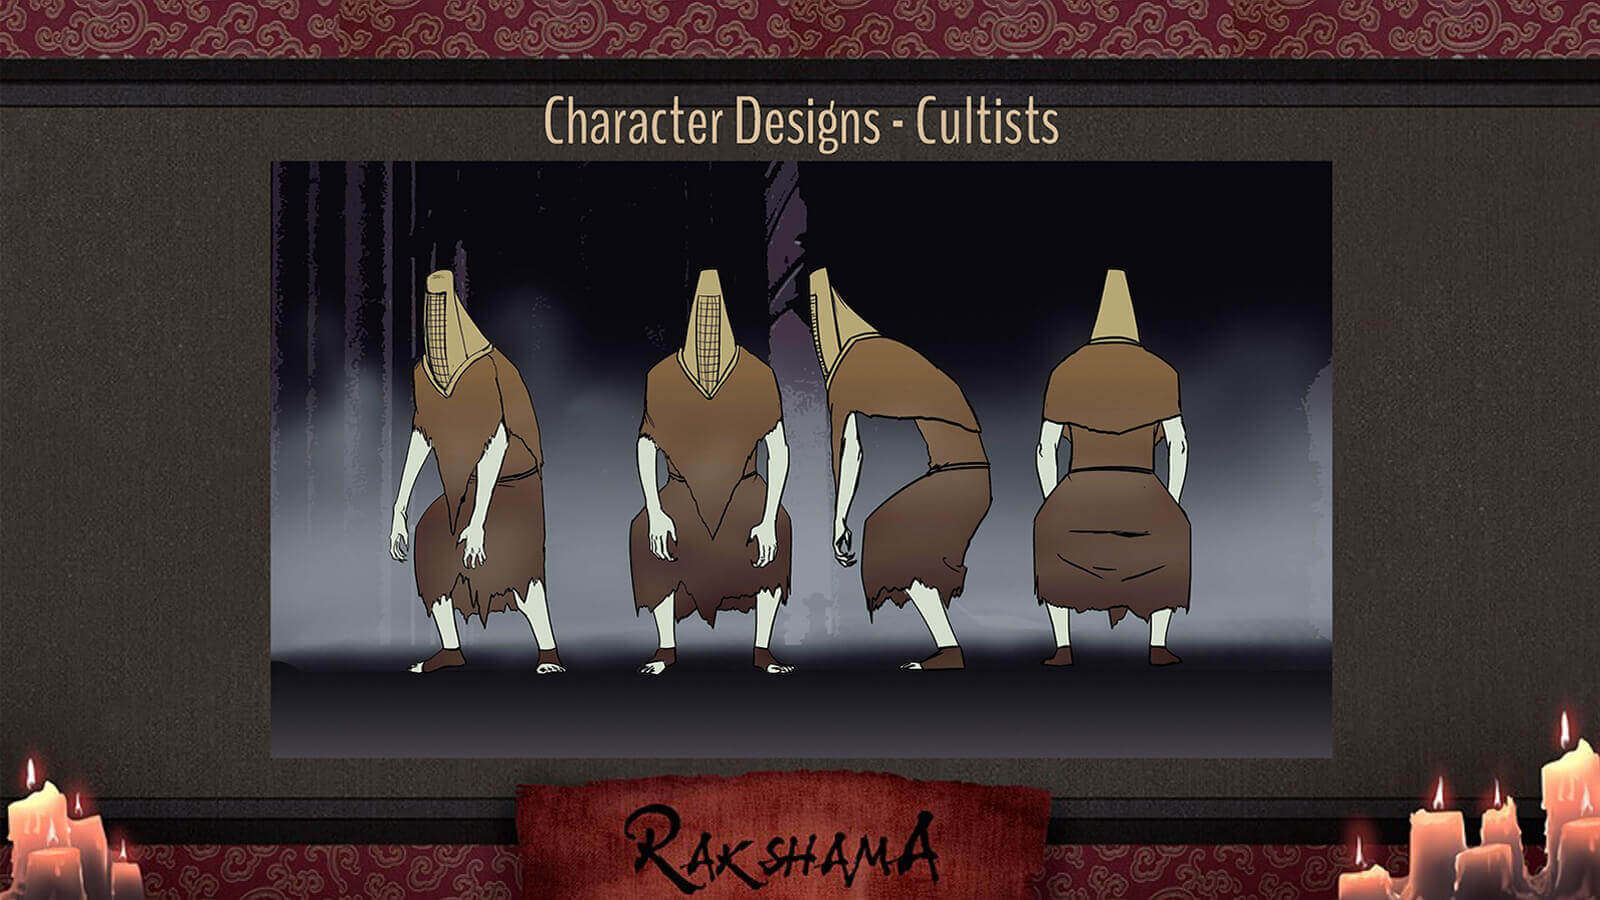 Character Design slide for the film Rakshama, depicting cultist characters, pale figures in brown rags and a wicker helmets